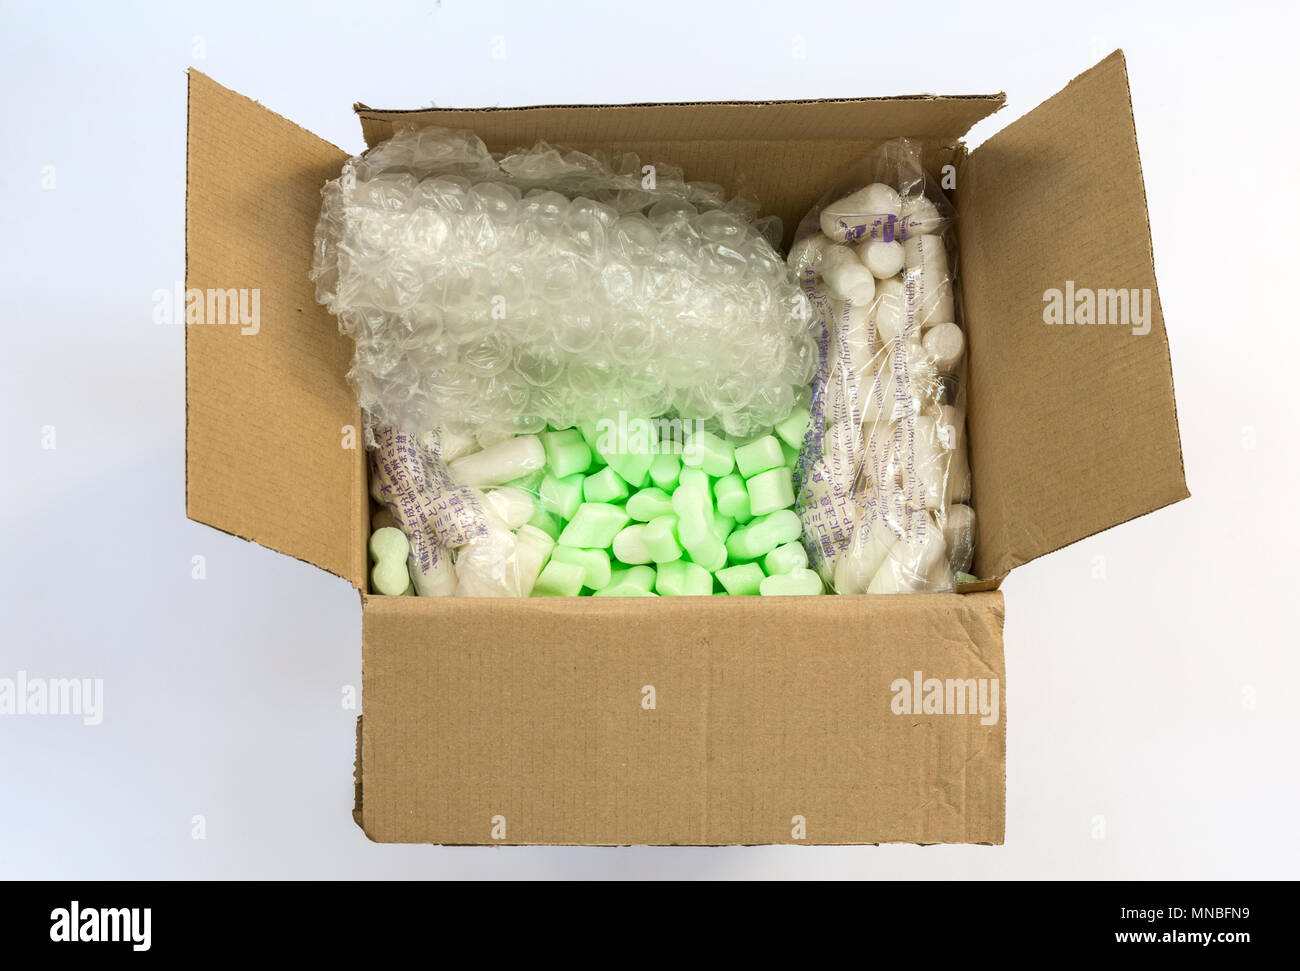 Polystyrene chips for packaging - Stock Image - A850/0174 - Science Photo  Library